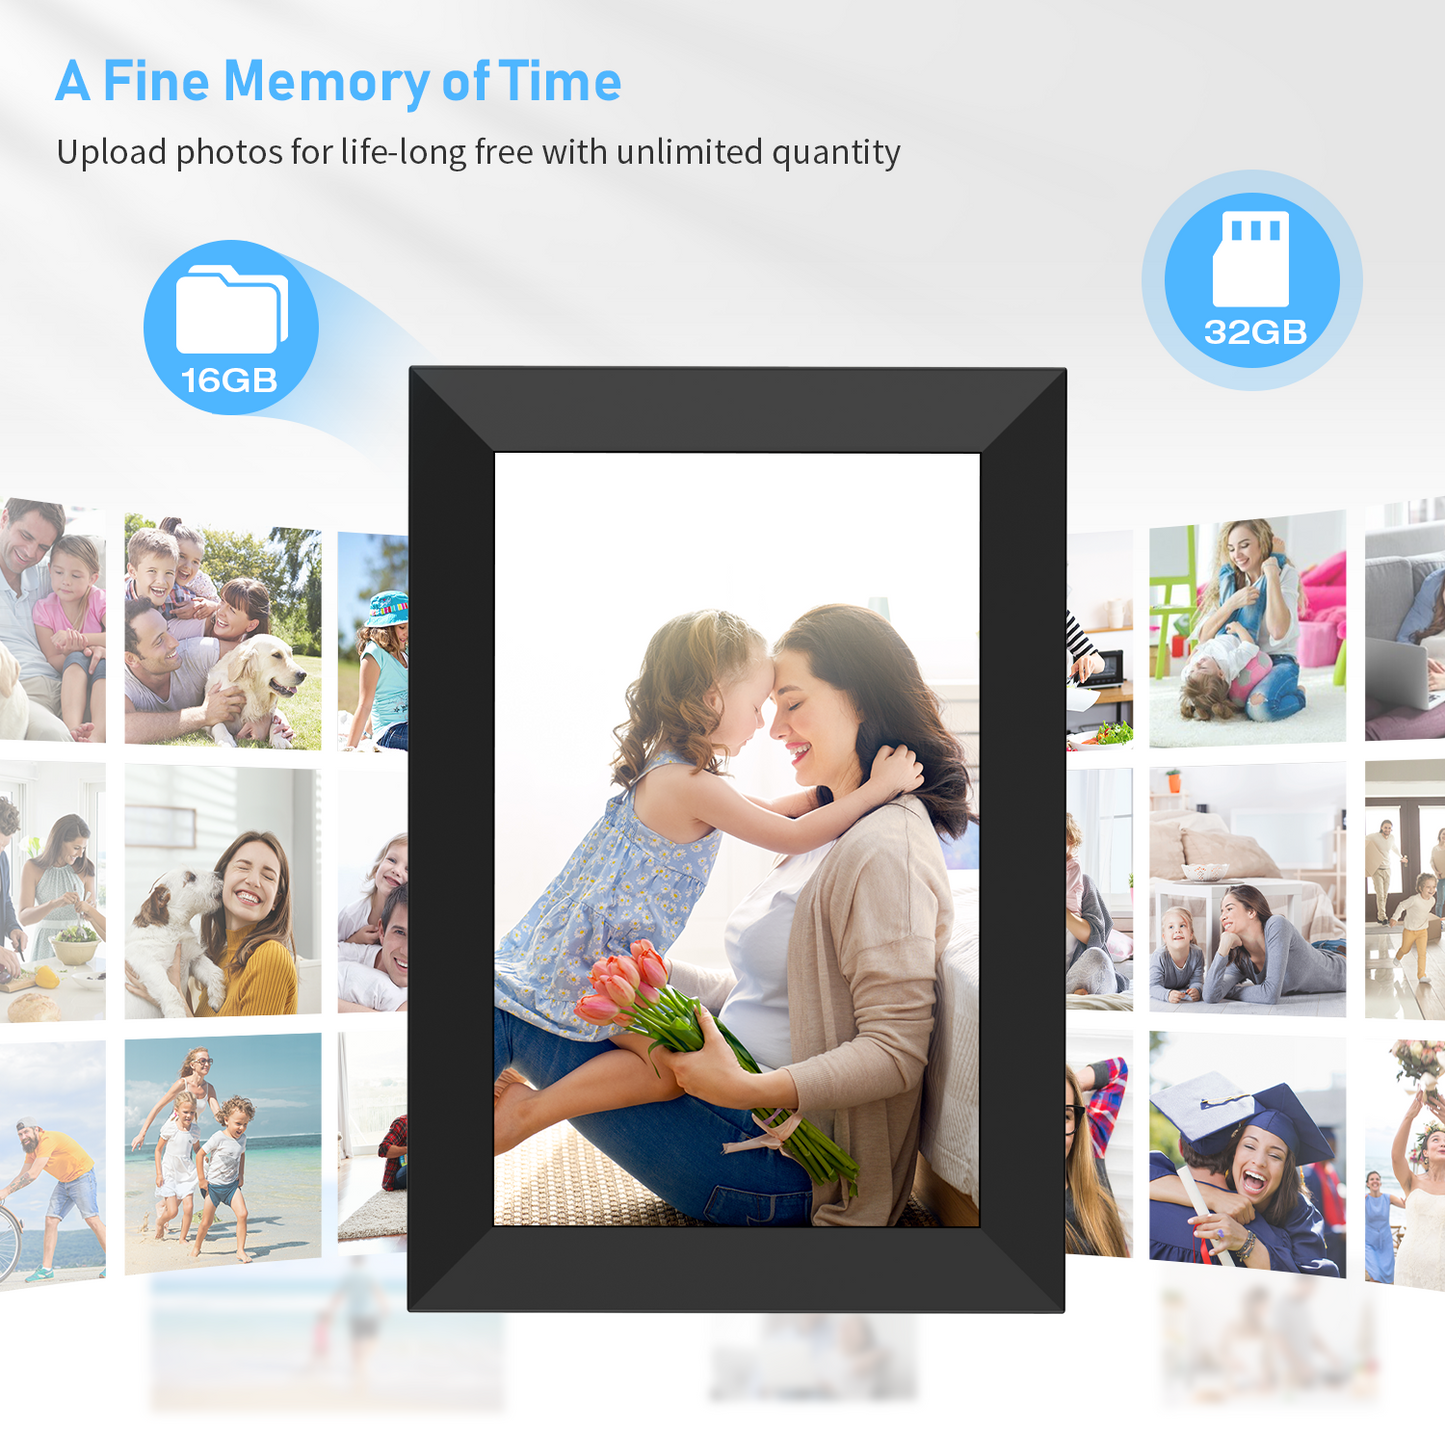 JEEMAK WiFi Digital Photo Frame 10" IPS Touch Screen Smart Cloud Picture Frame 16GB Built-in Storage Auto-Rotate